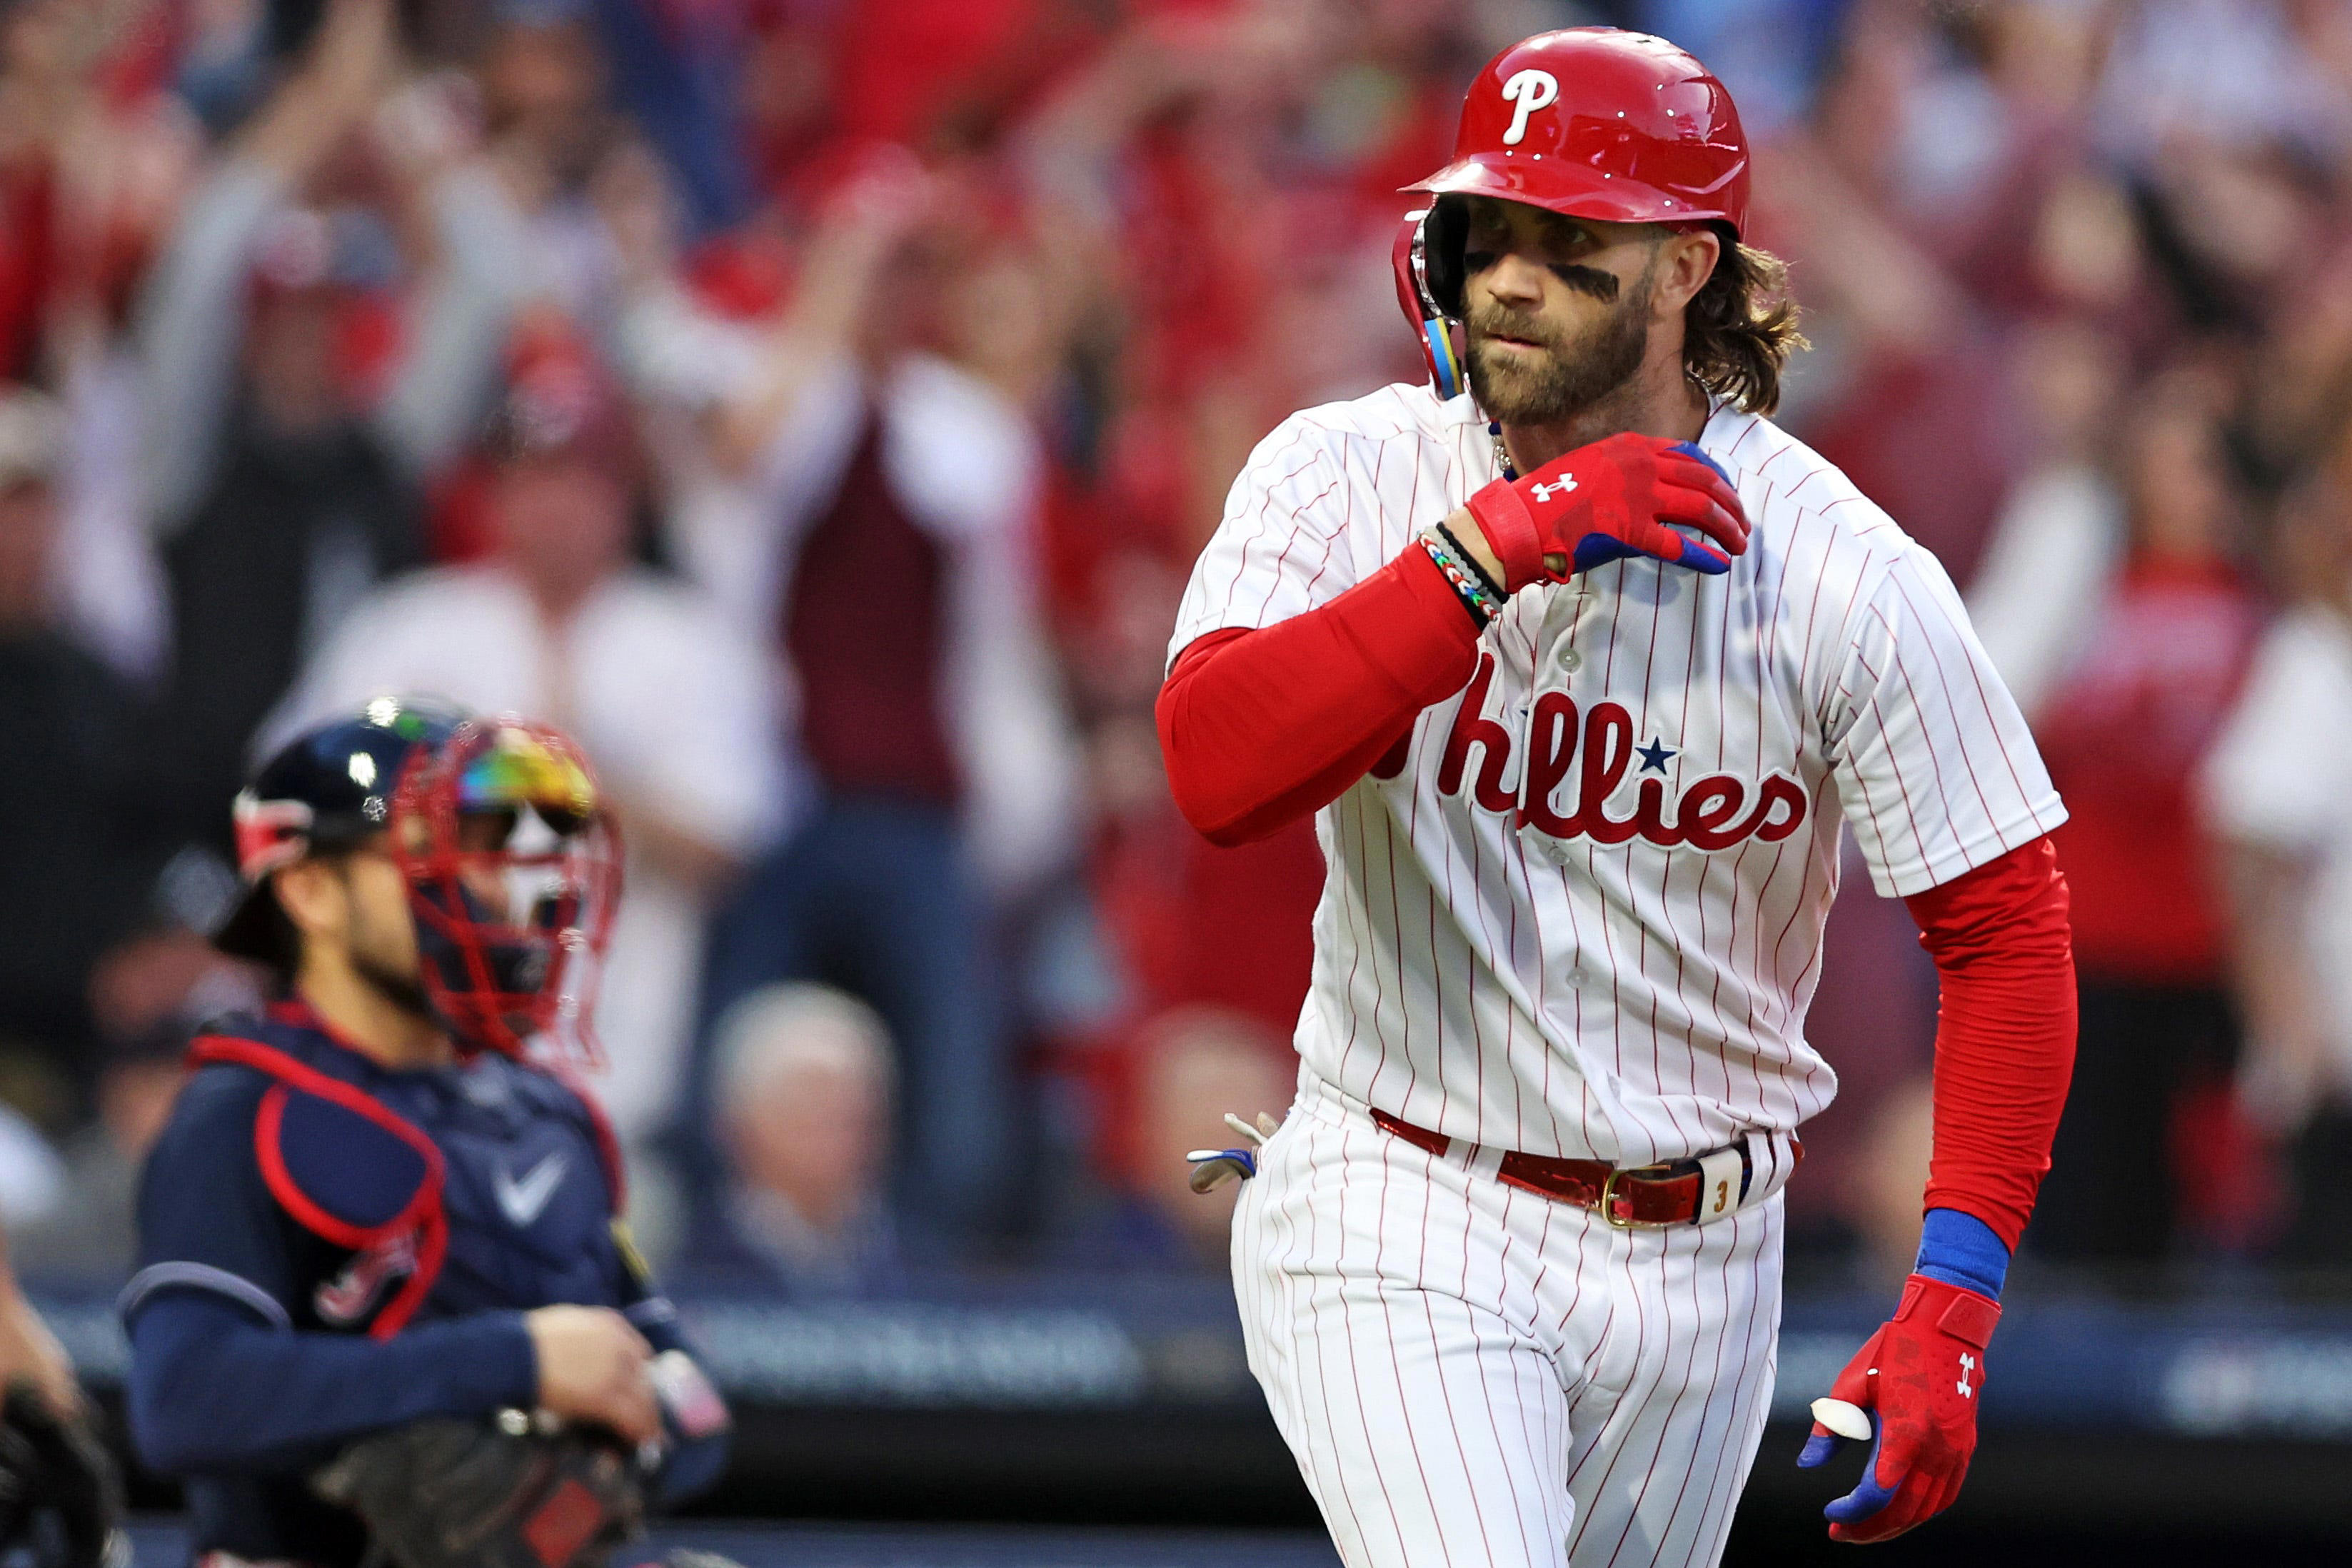 Phillies vs. Braves live score updates Bryce Harper crushes two home